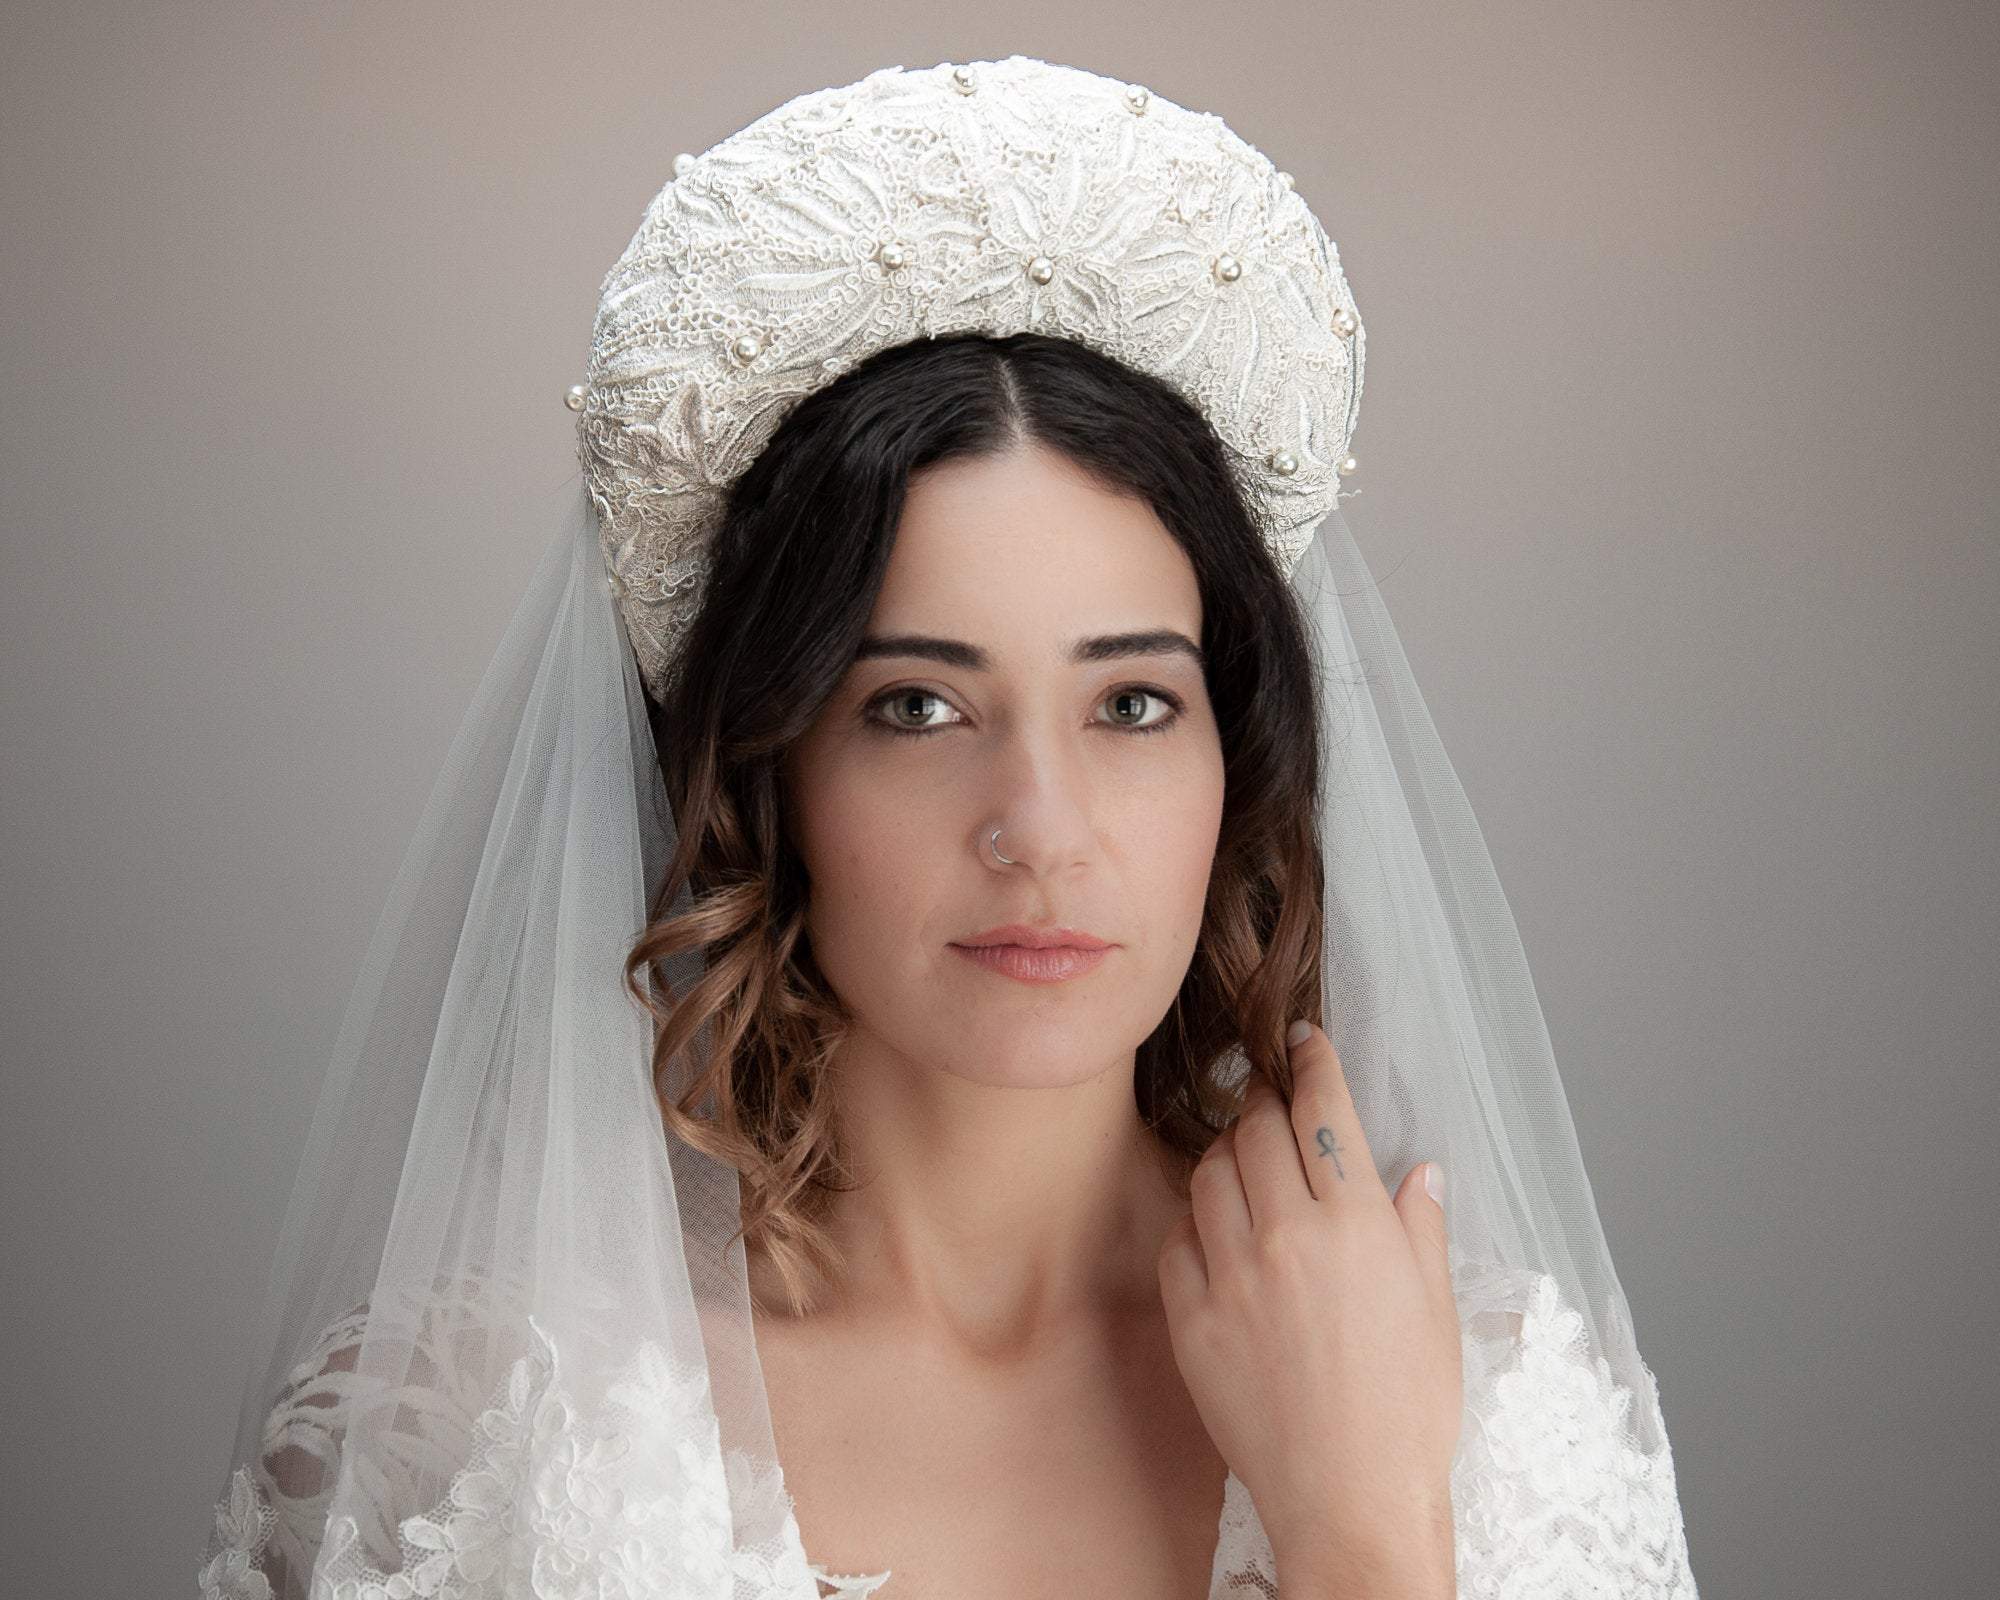 HAIR CIRCLET - BOLD BRIDAL CROWN FROM HIGH QUALITY LACE WITH PEARLS IN BRIGHT CREME COLOUR © Seegang Berlin